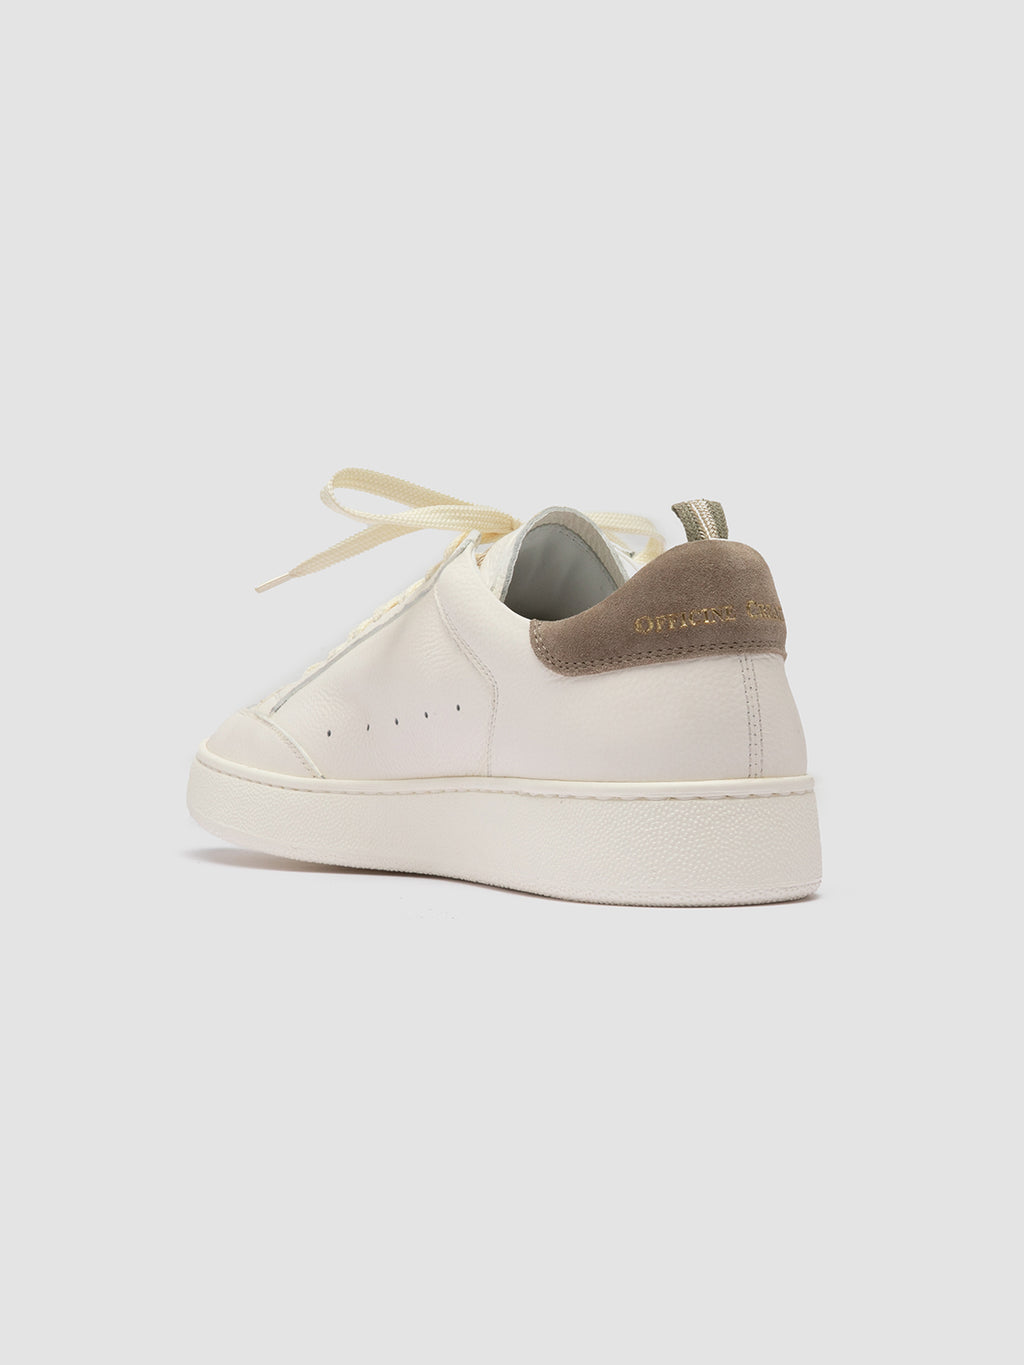 THE DIME 001 - White Suede Low Top Sneakers Men Officine Creative - 4